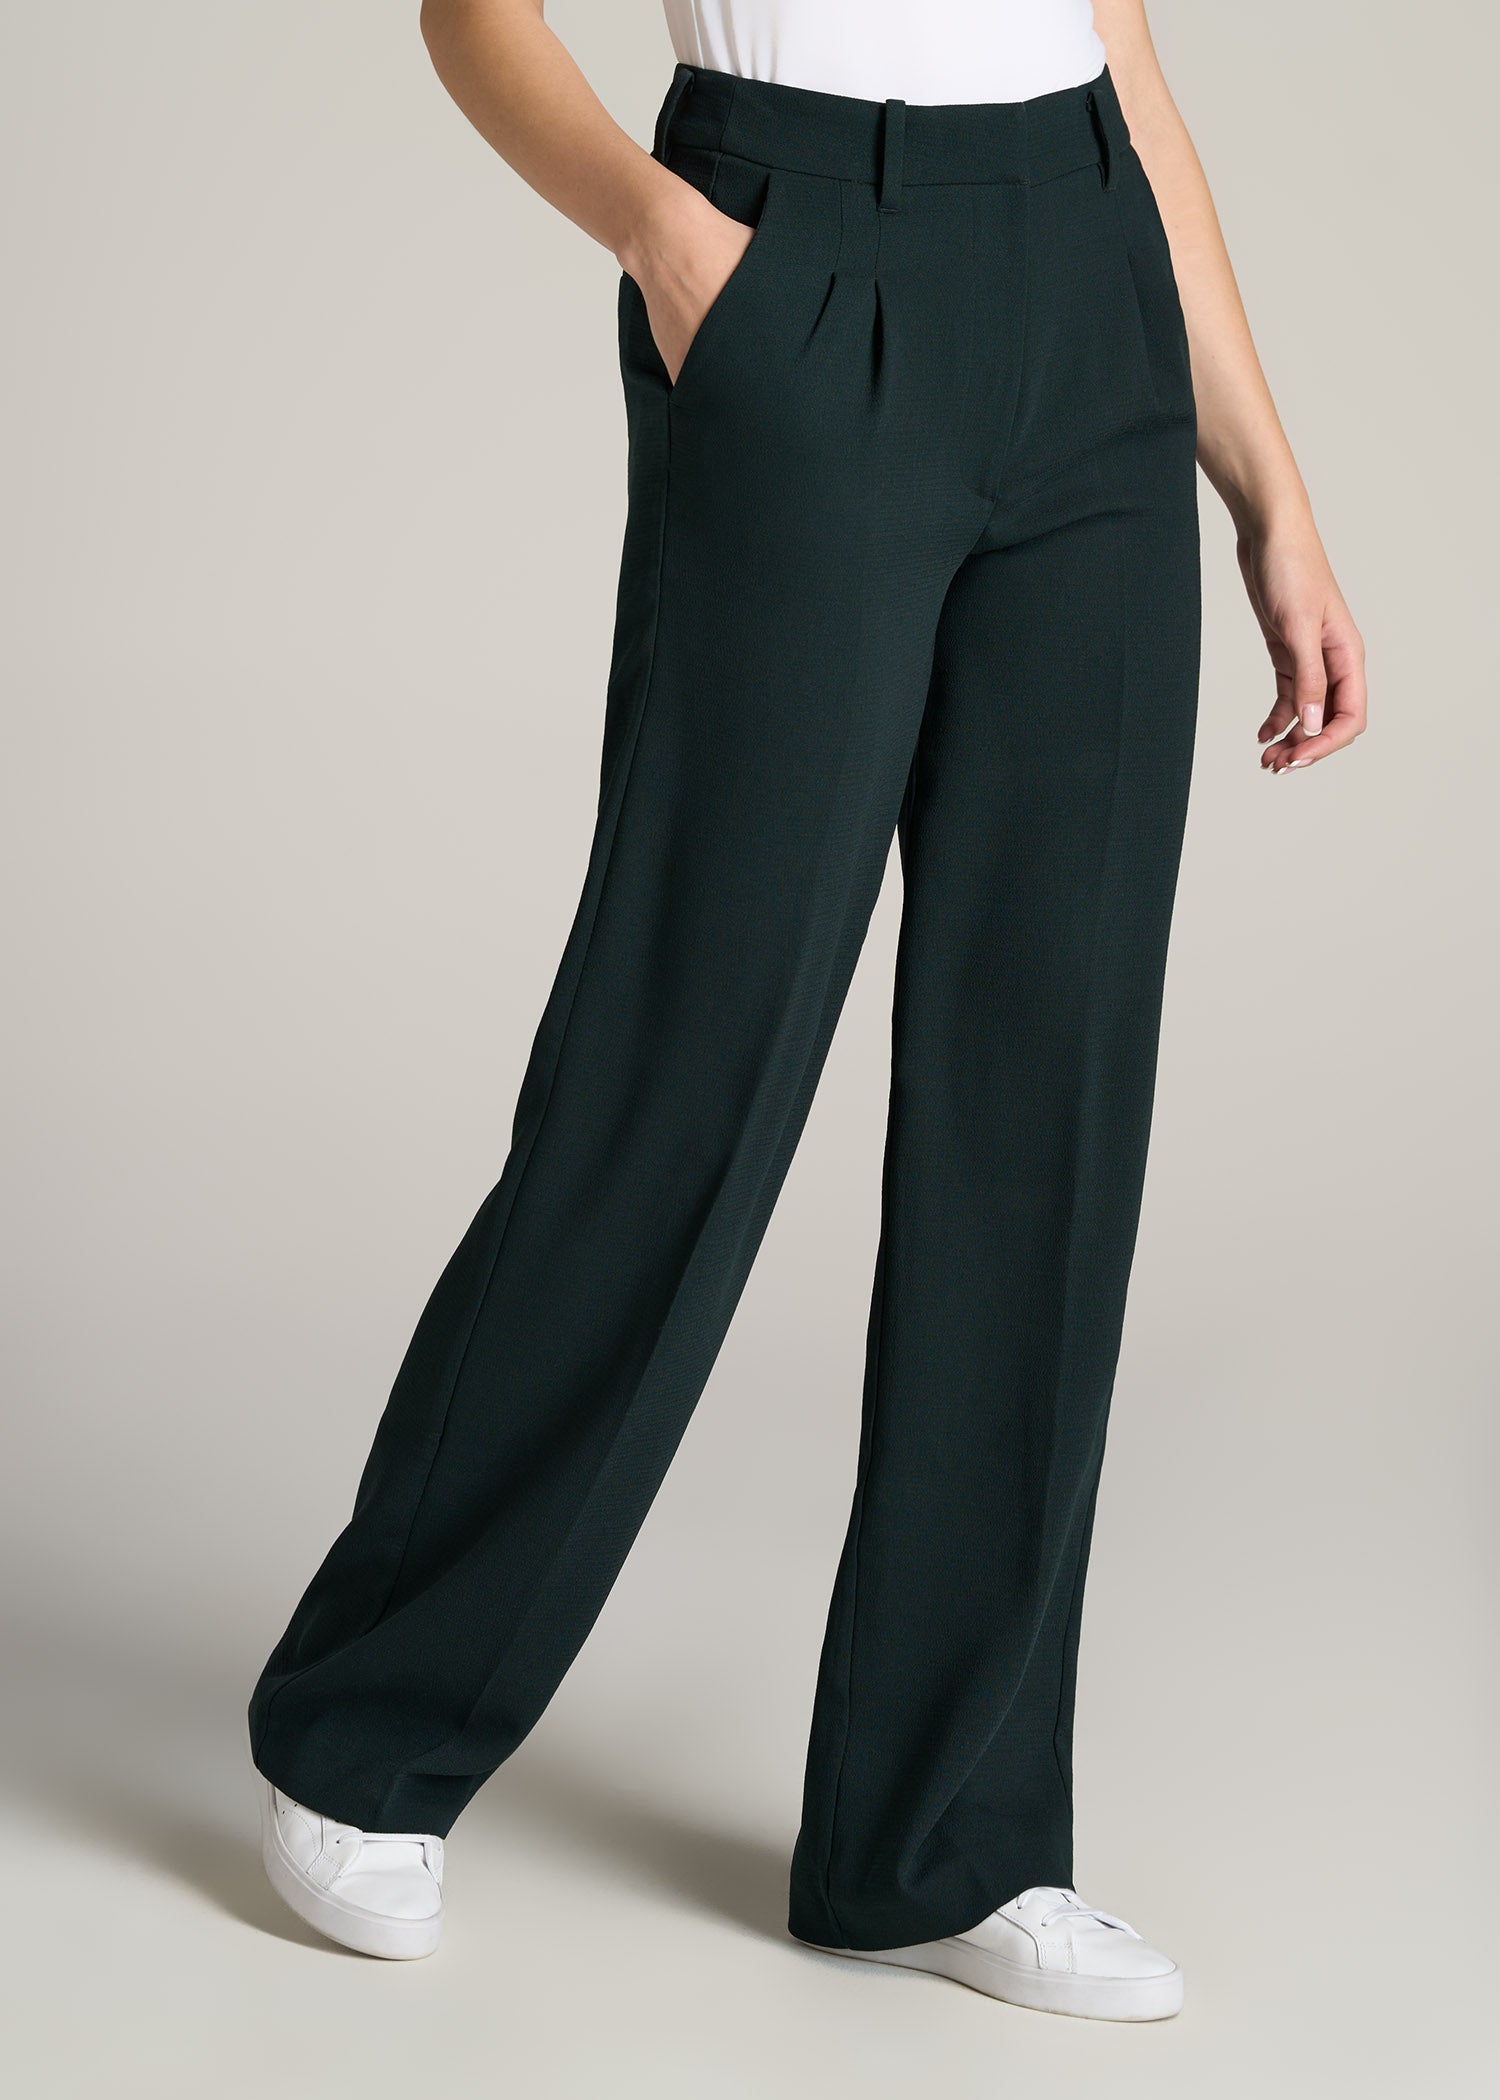 tall pants for women